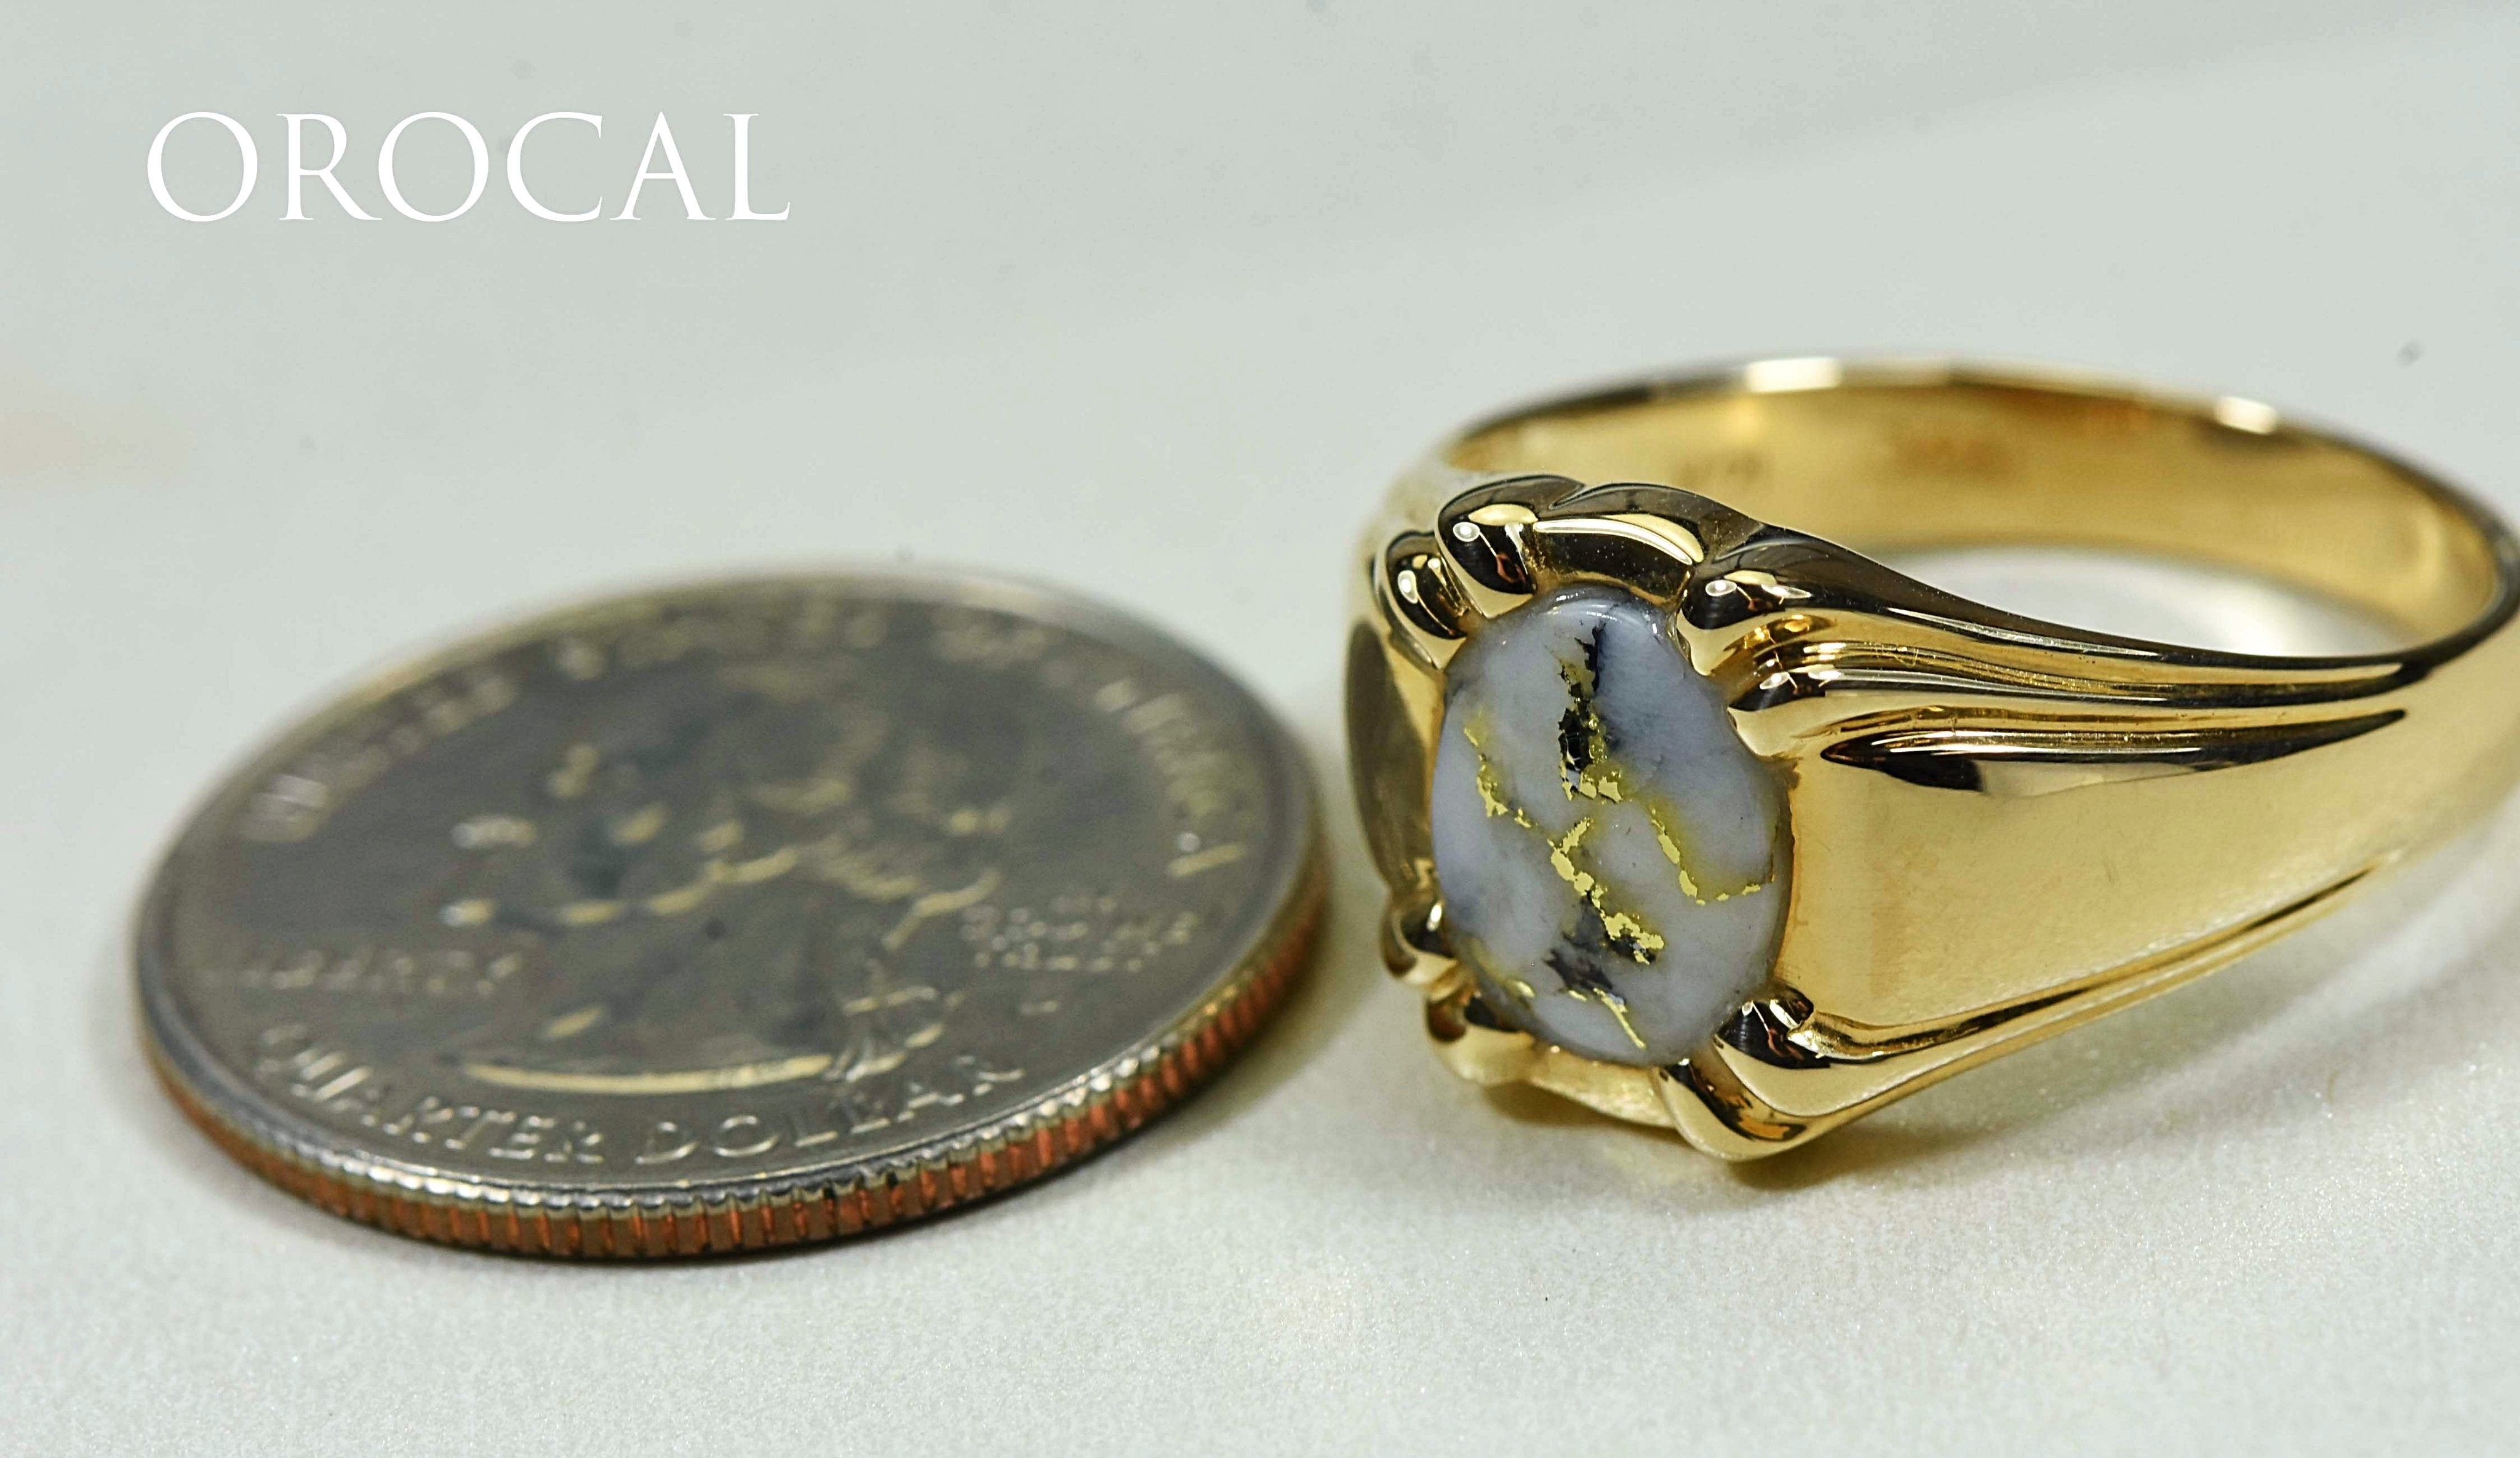 Gold Quartz Ring "Orocal" RM791Q Genuine Hand Crafted Jewelry - 14K Gold Casting